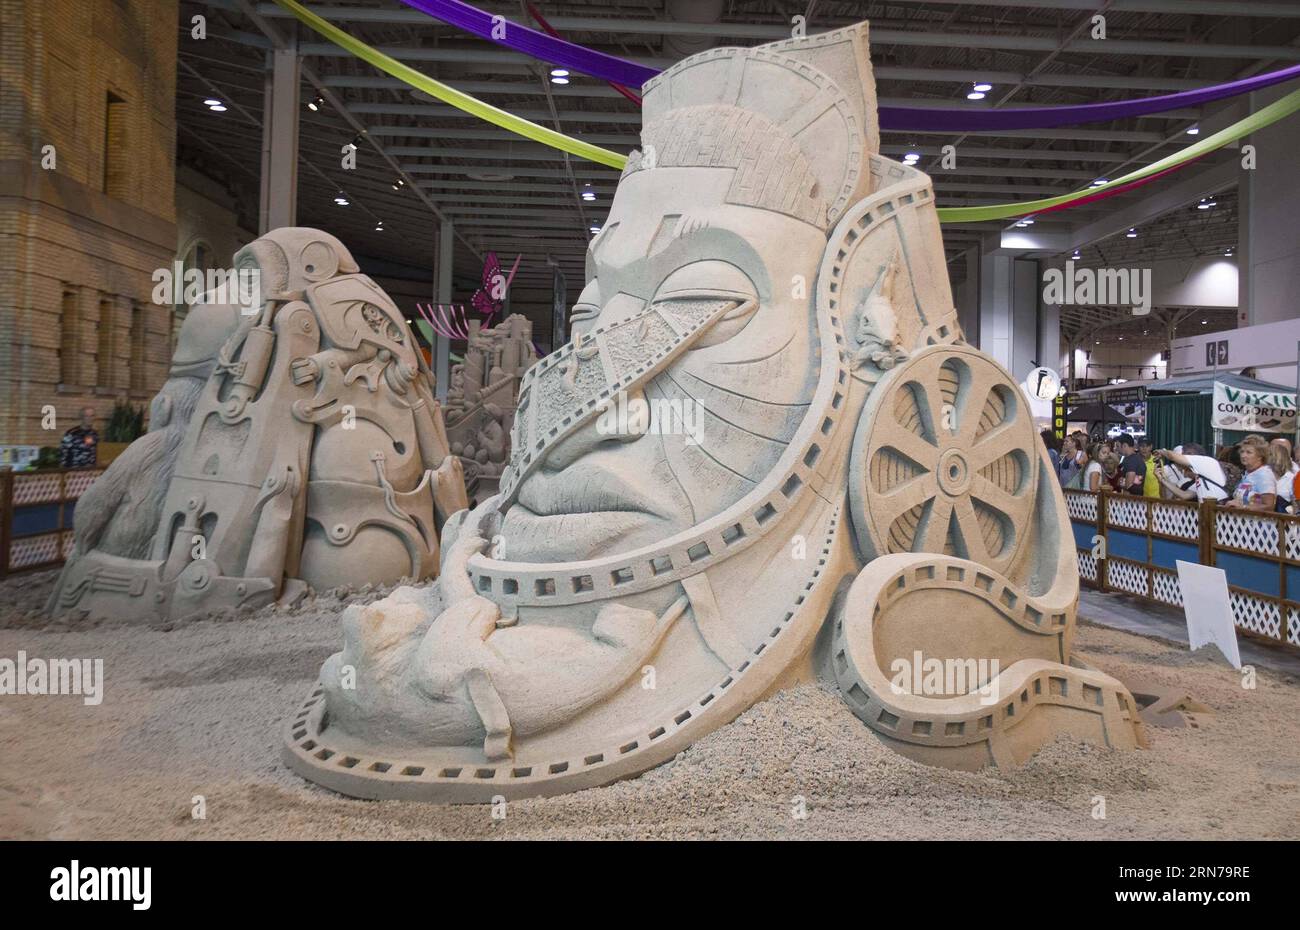 KULTUR Sandskulpturen Wettbewerb in Toronto (150829) -- TORONTO, Aug. 28, 2015 -- Sand sculptures are displayed during the 2015 International Sand Sculpting Pairs Competition at the 137th Canadian National Exhibition in Toronto, Canada, Aug. 28, 2015. ) CANADA-TORONTO-CANADIAN NATIONAL EXHIBITION-SAND SCULPTING PAIRS COMPETITION ZouxZheng PUBLICATIONxNOTxINxCHN   Culture Sand sculptures Competition in Toronto  Toronto Aug 28 2015 Sand Sculptures are displayed during The 2015 International Sand sculpting pairs Competition AT The 137th Canadian National Exhibition in Toronto Canada Aug 28 2015 C Stock Photo